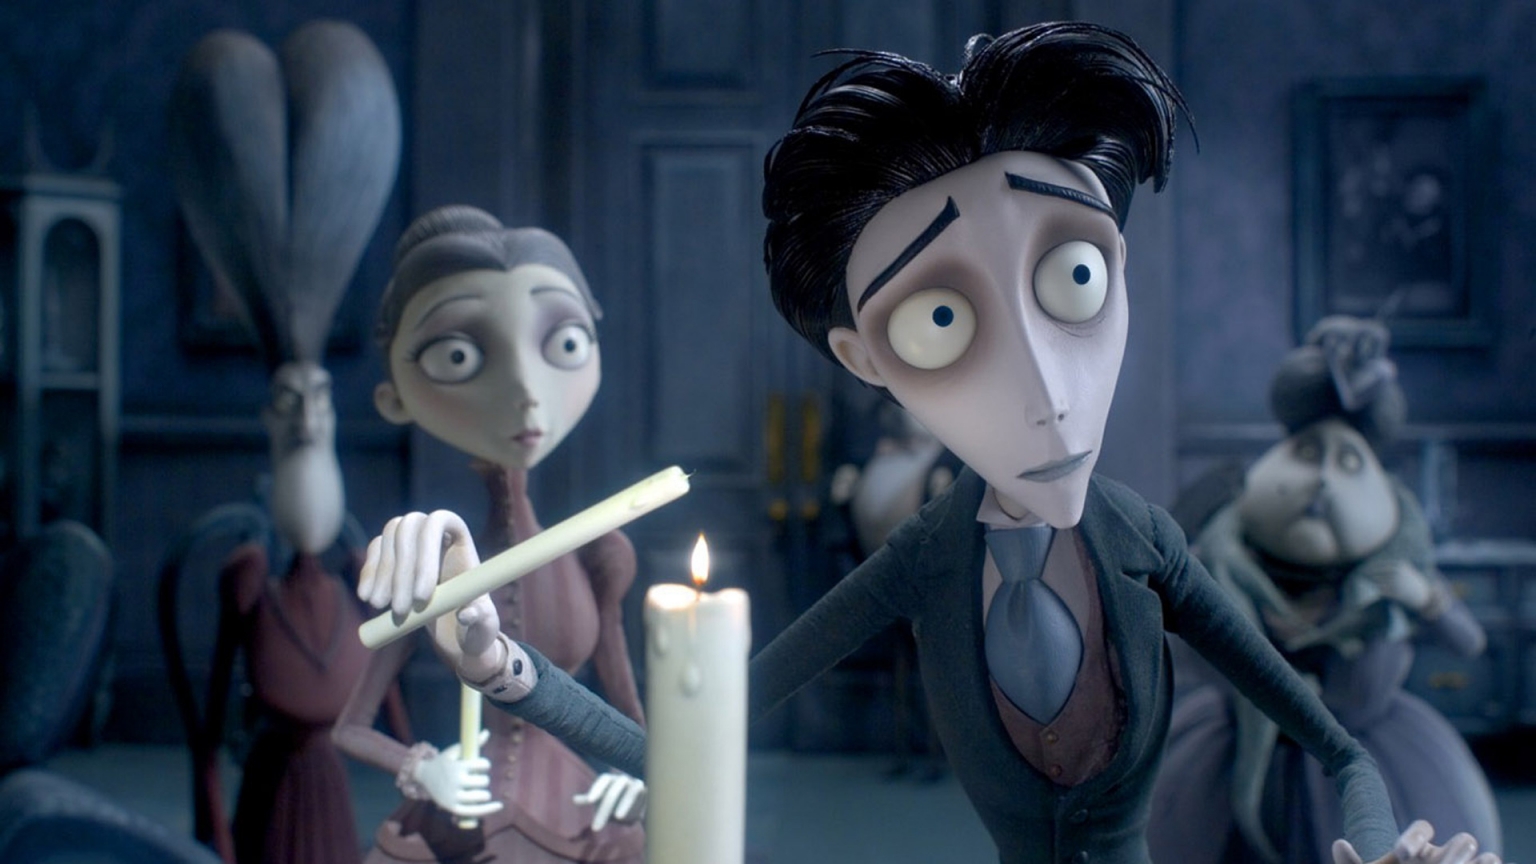 Corpse Bride for 1536 x 864 HDTV resolution